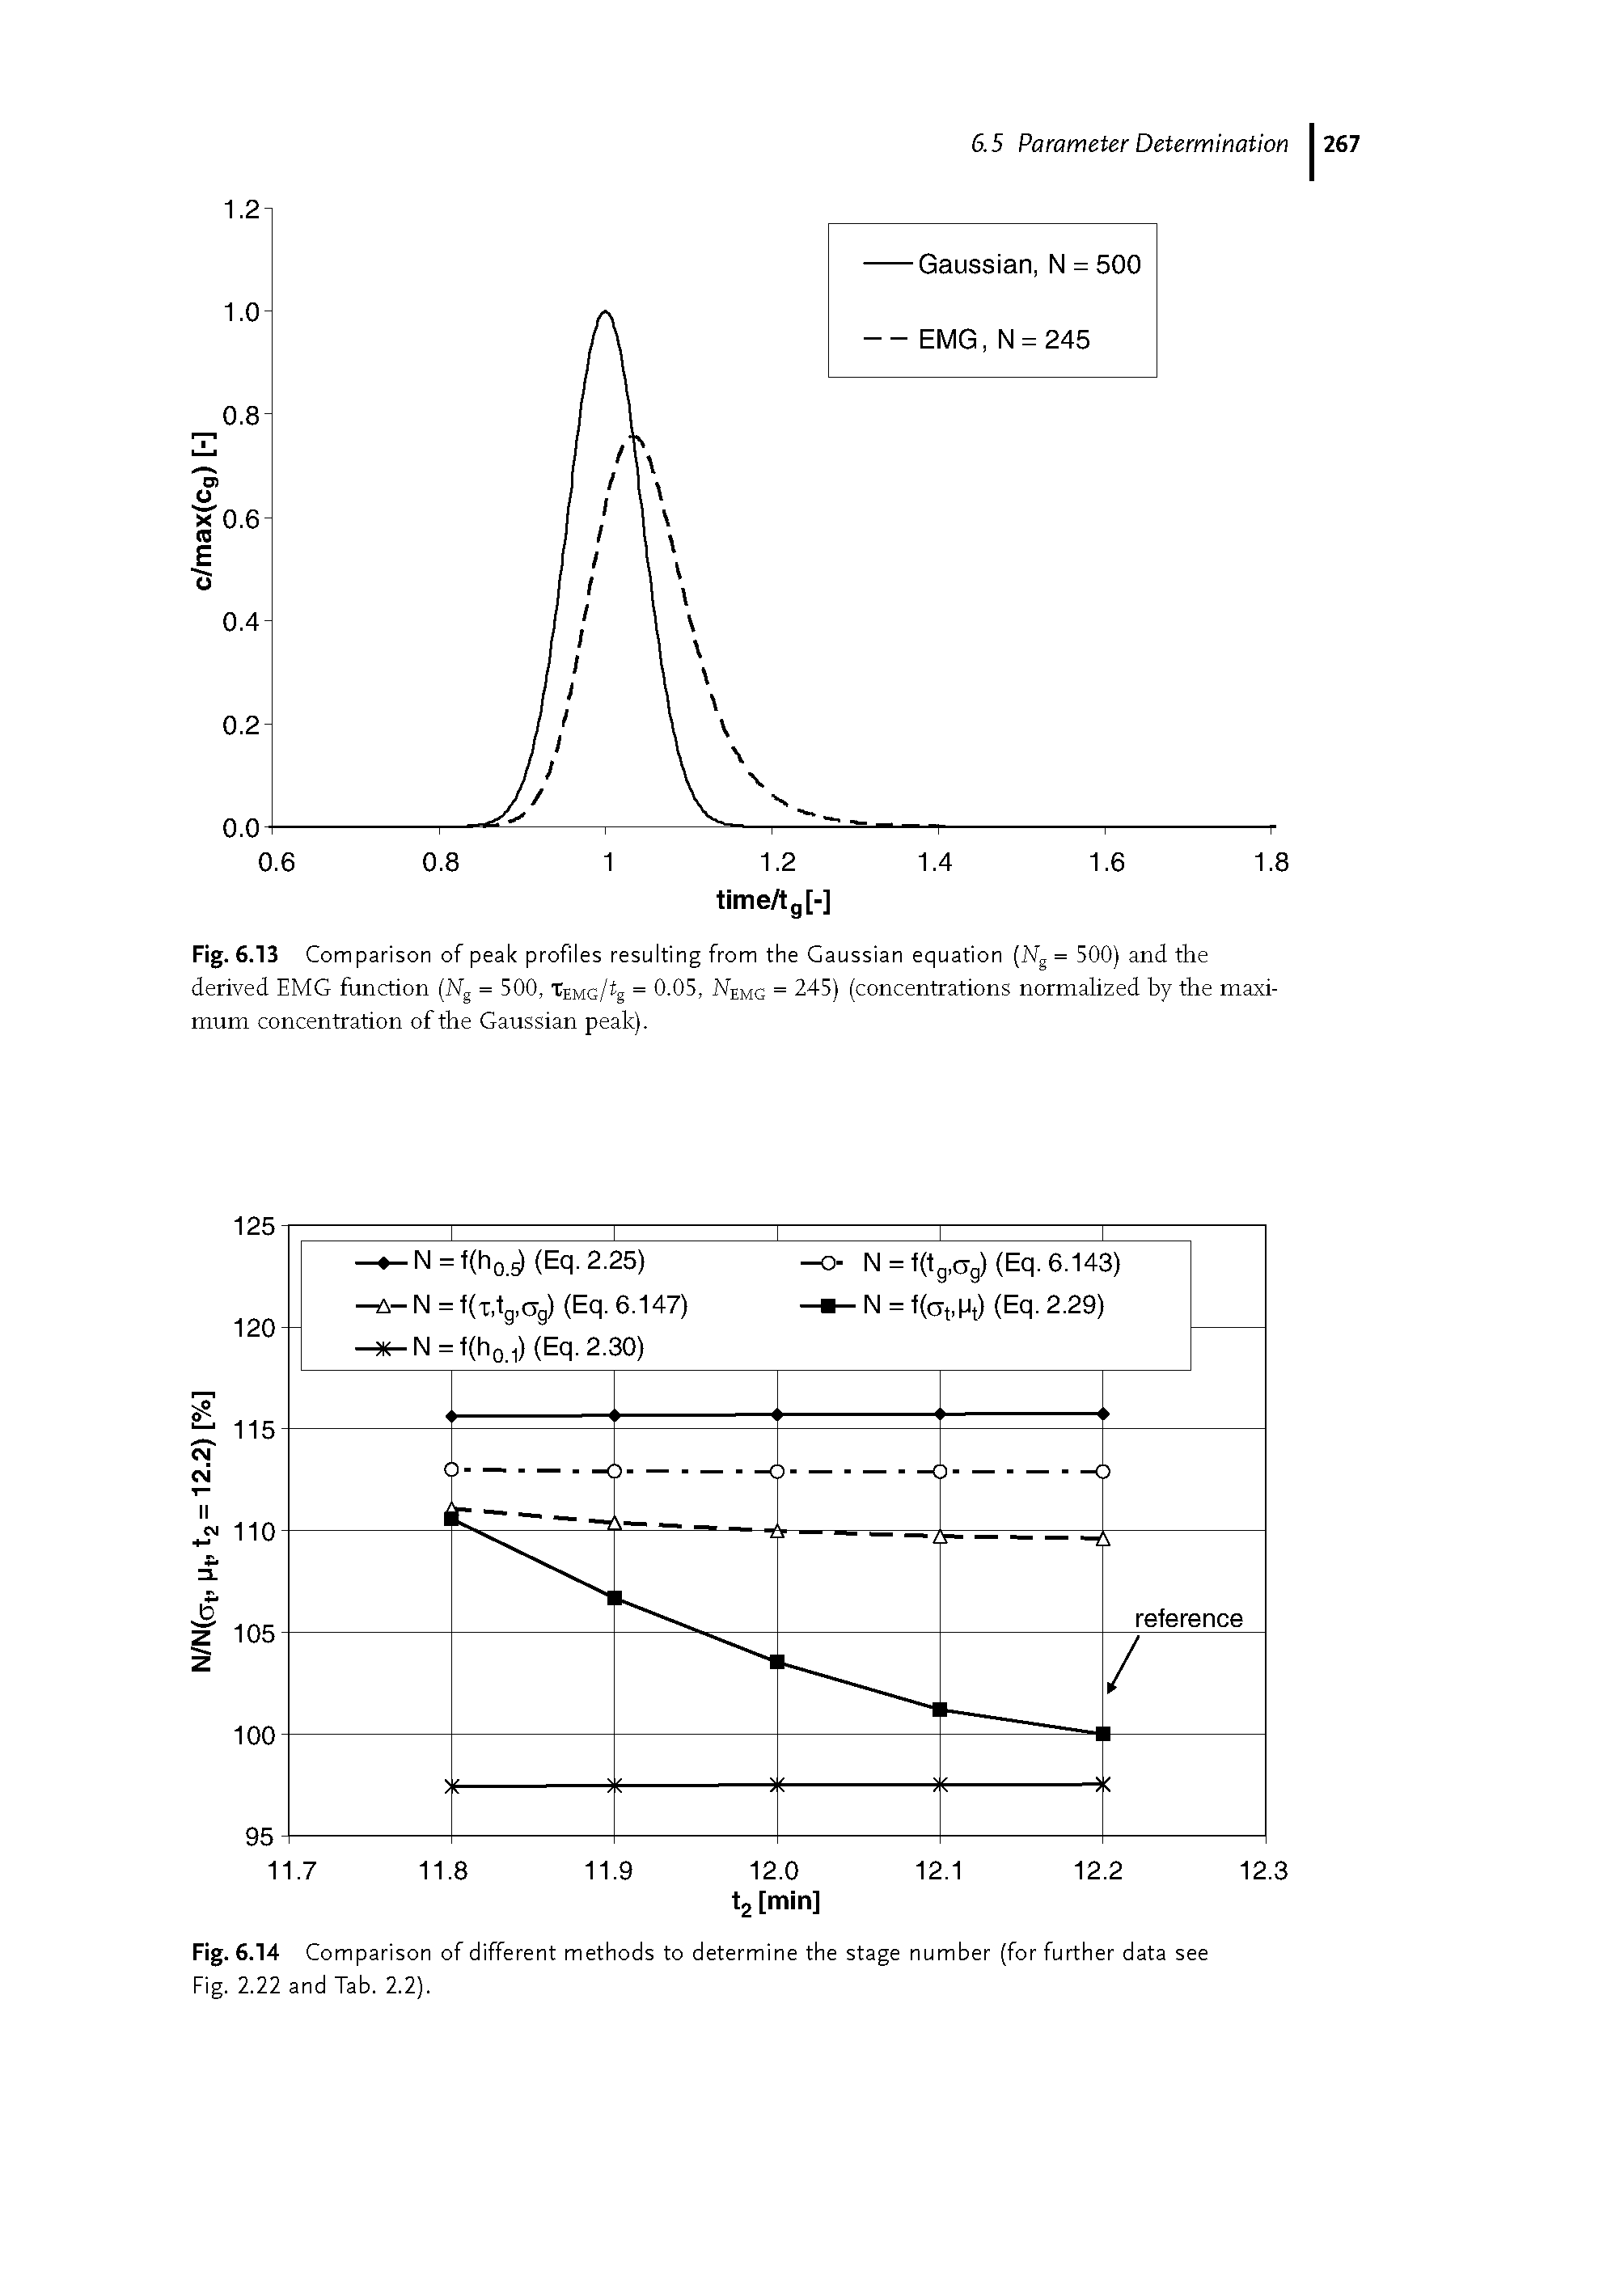 Fig. 6.14 Comparison of different methods to determine the stage number (for further data see Fig. 2.22 and Tab. 2.2).